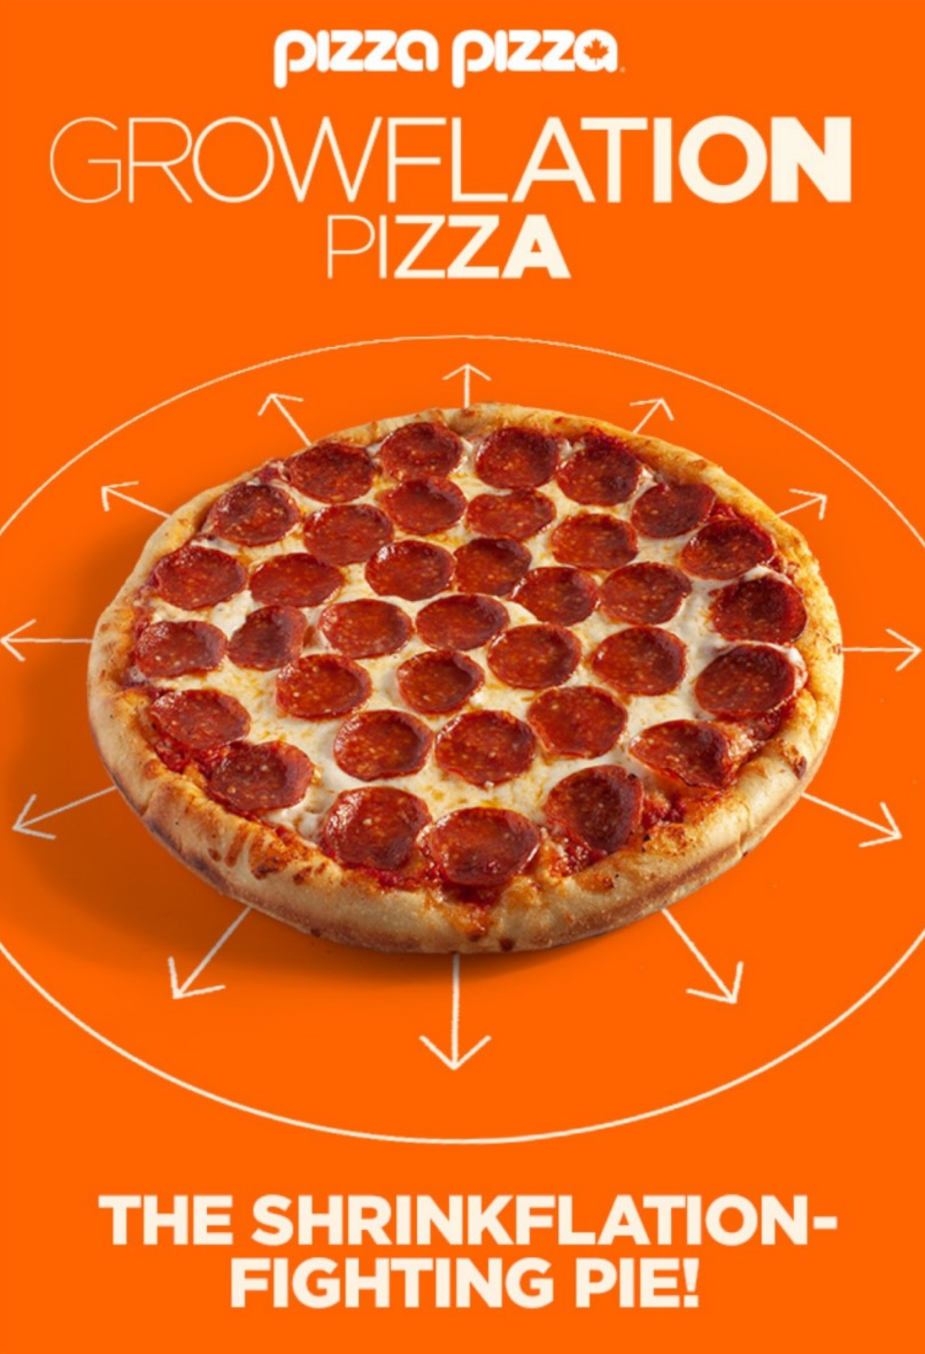 Pizza Pizza Bites Back Against Shrinkflation by Sizing Up a Pizza